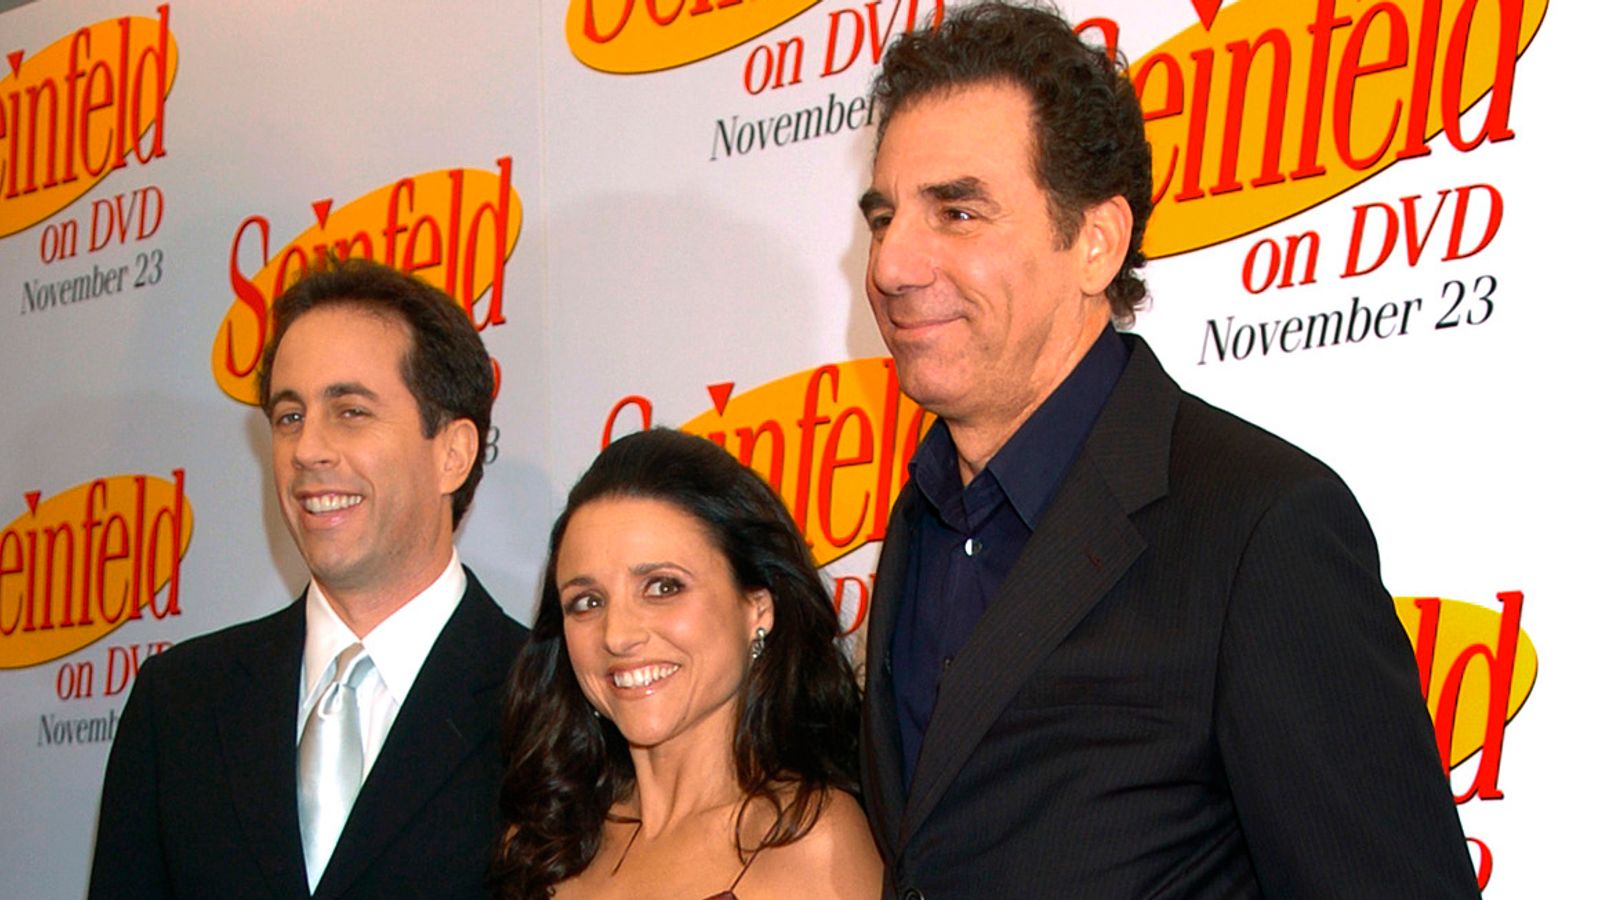 Jerry Seinfeld hints at TV show reunion, saying ‘something is going to happen’ 25 years after its finale | Ents & Arts News